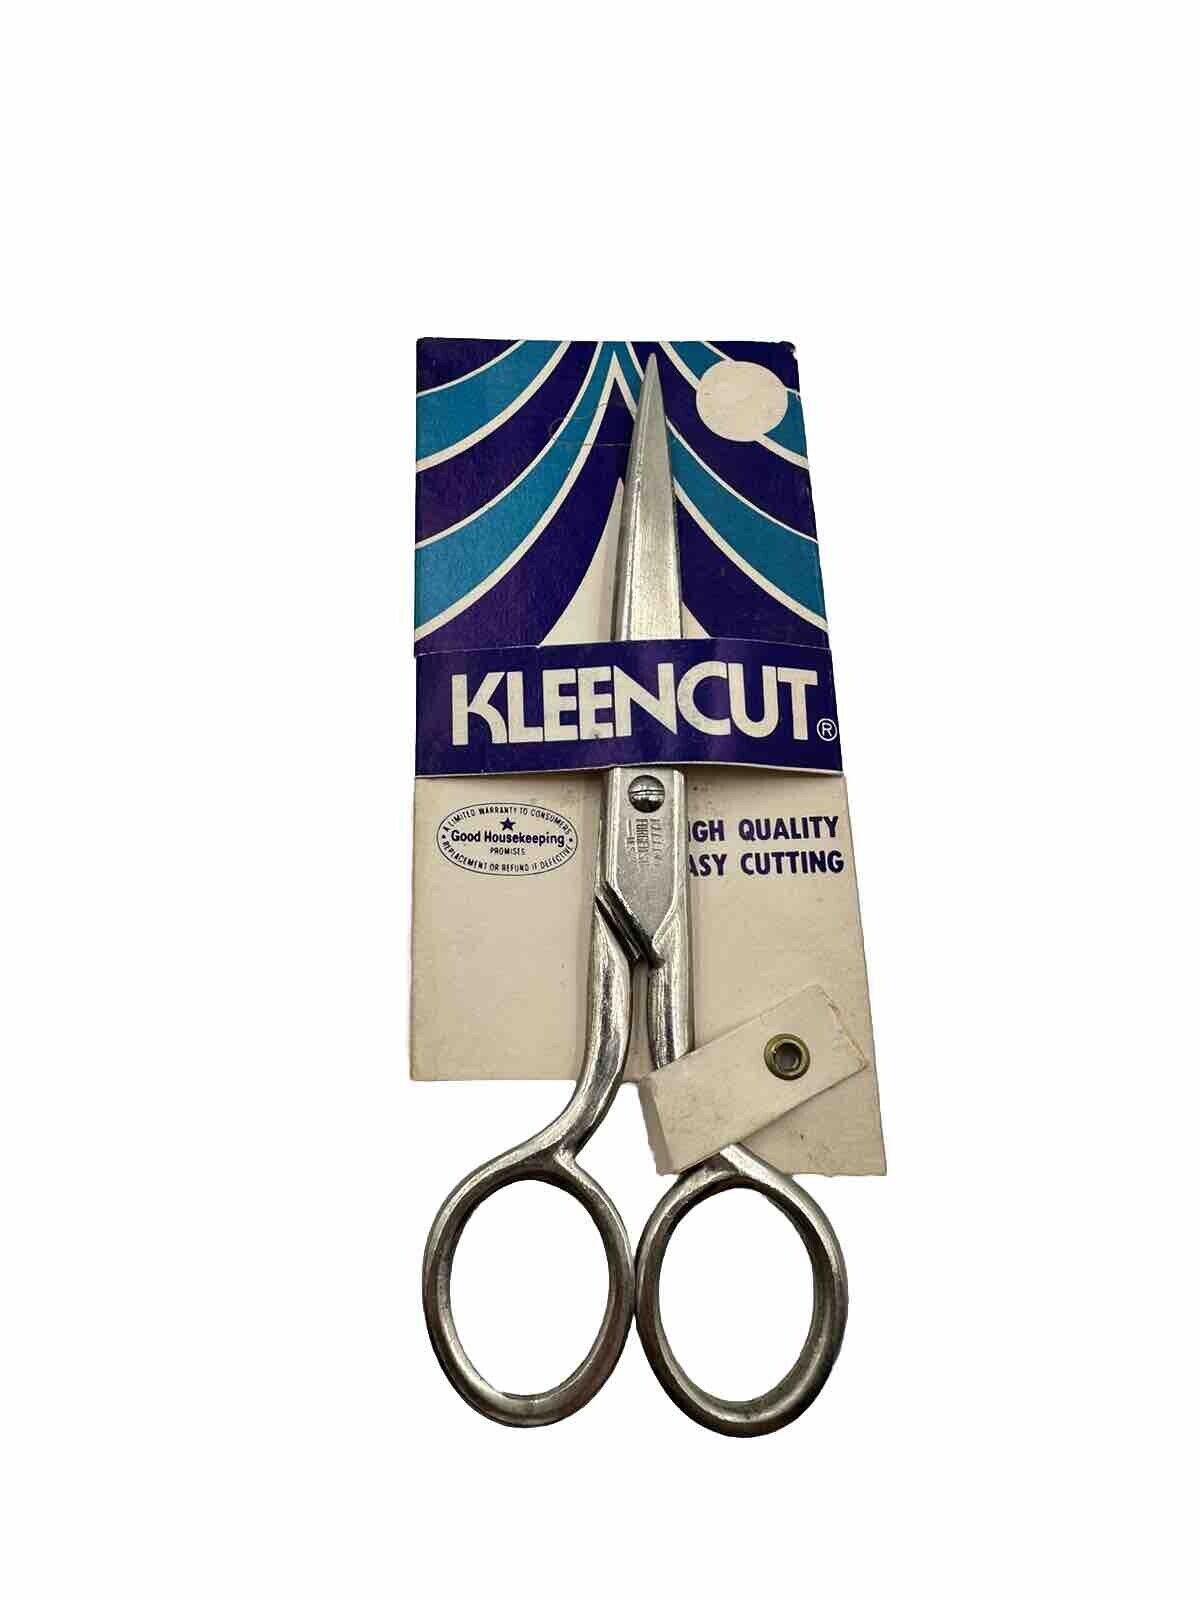 Kleencut Deluxe Vintage Scissors Shears 6” Made in USA Forged Steel B53